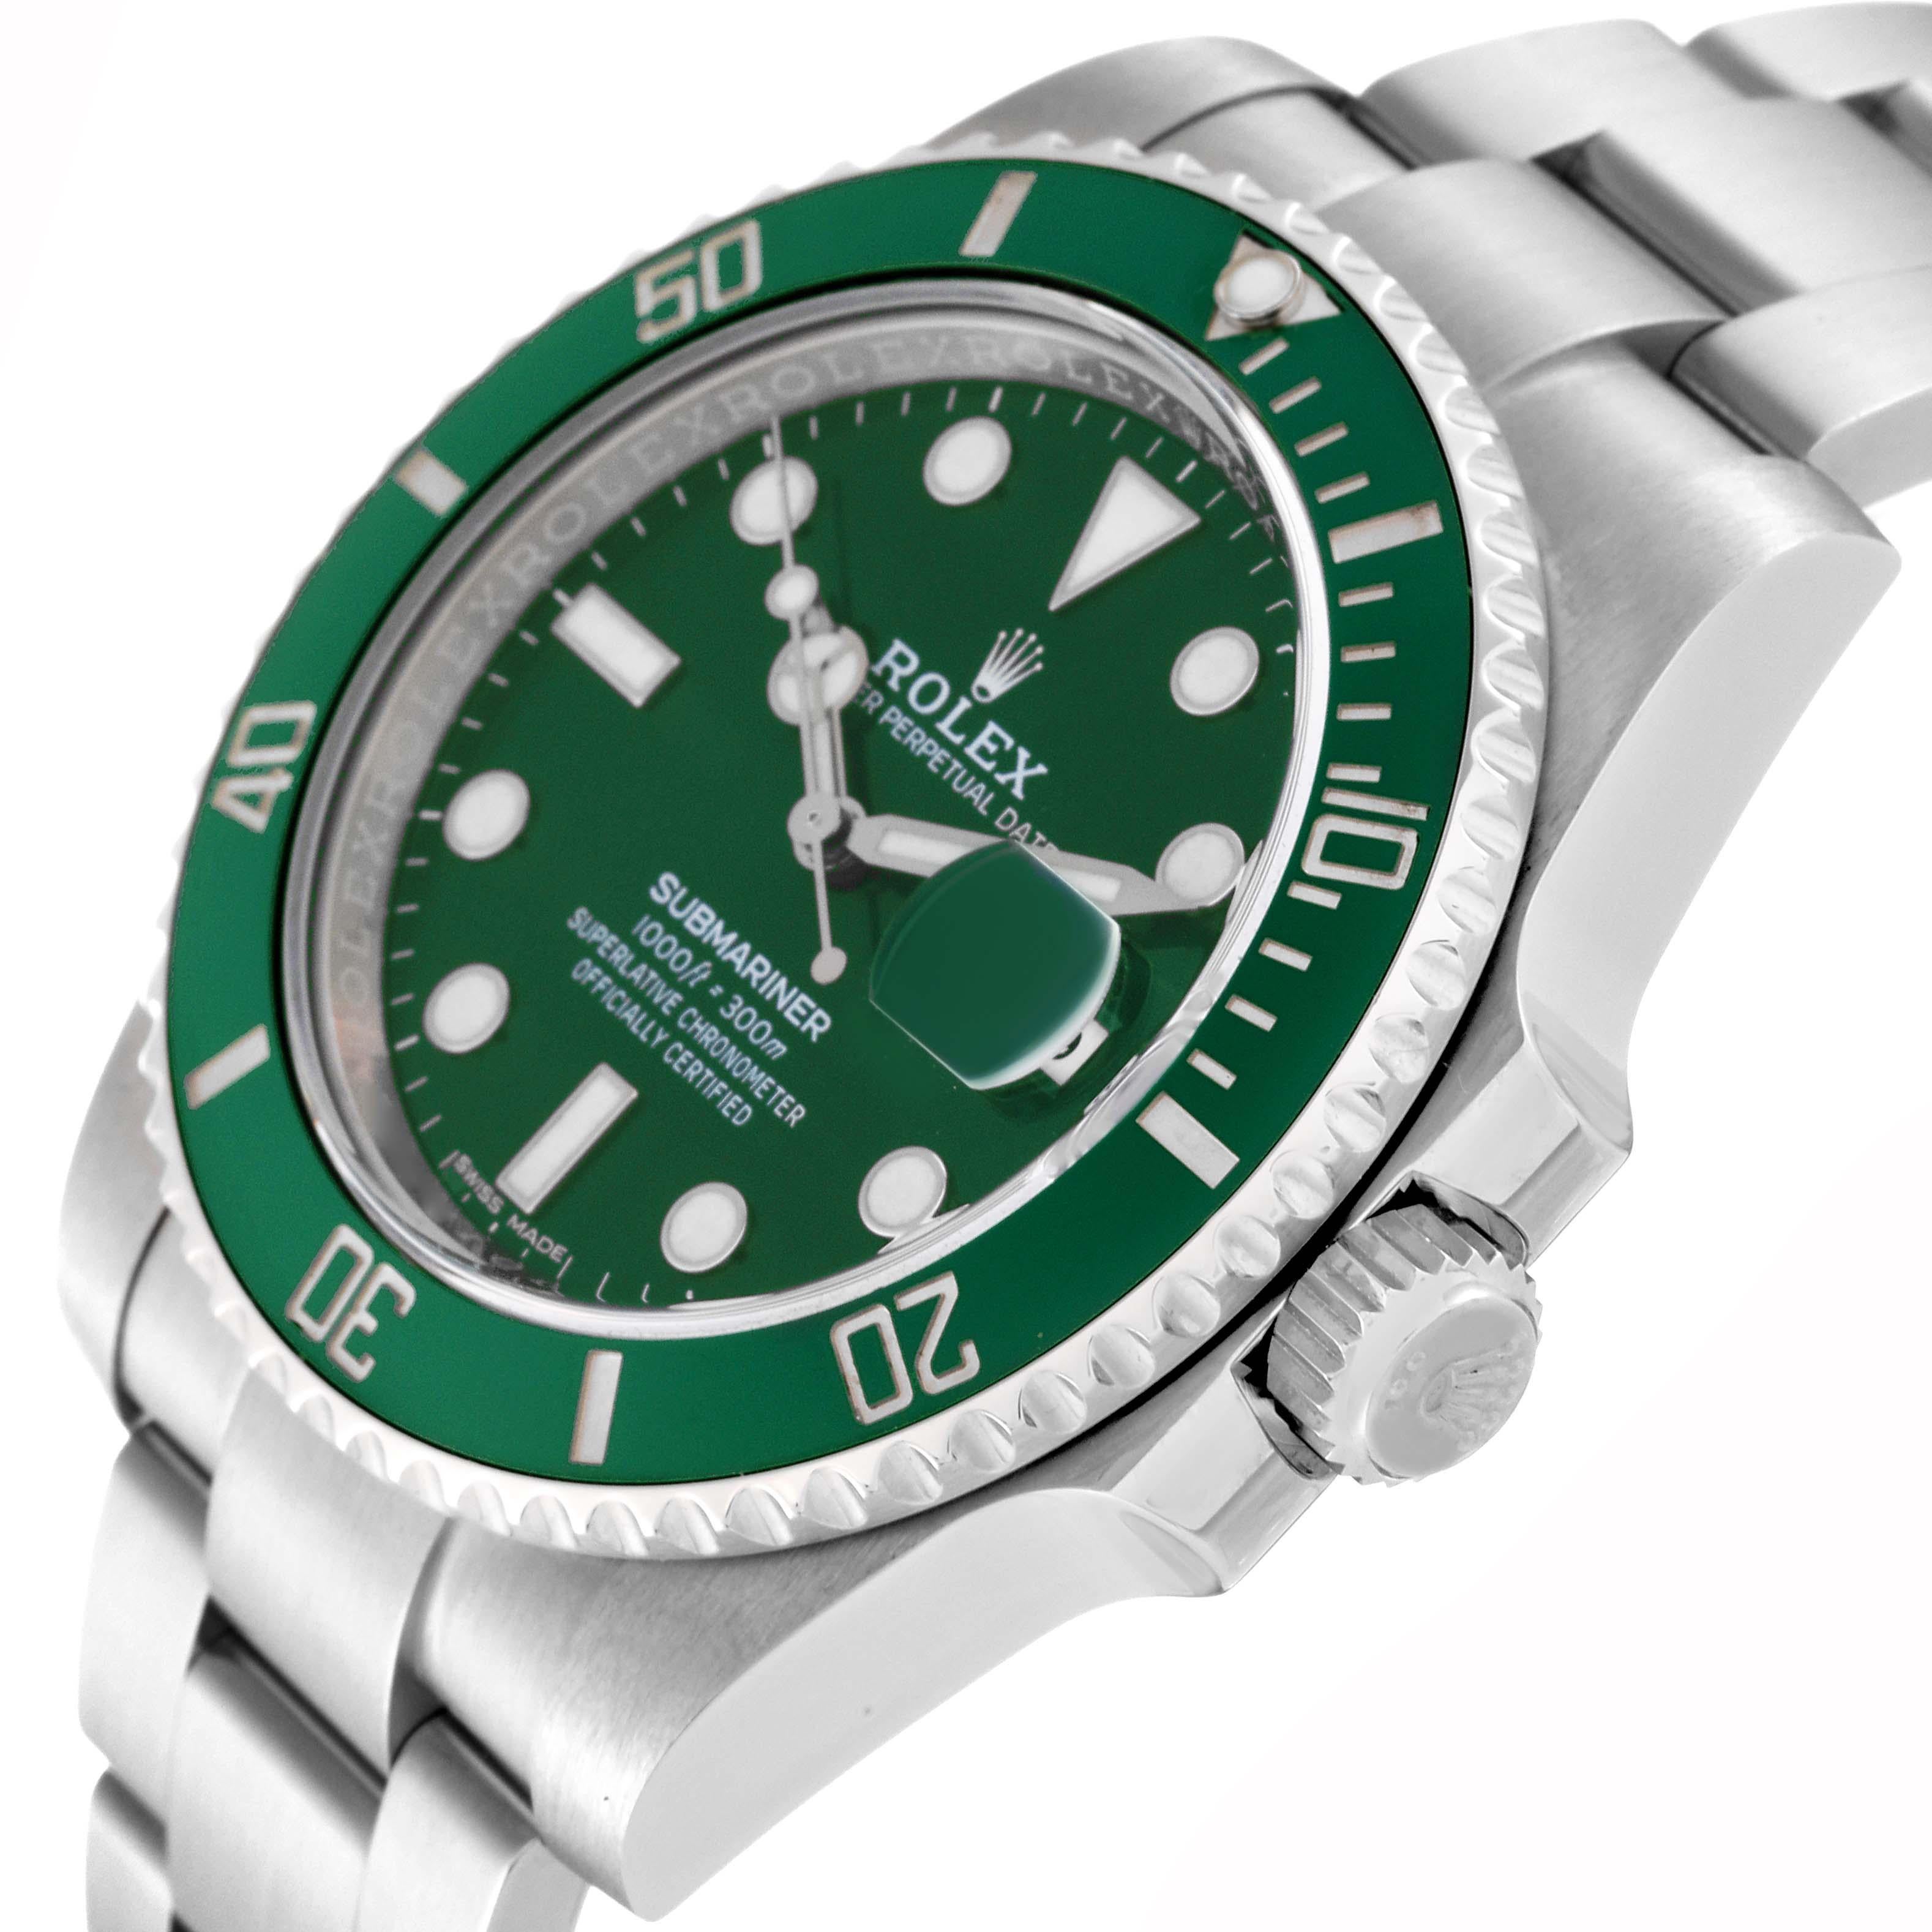 Rolex Submariner Hulk Green Dial Steel Mens Watch 116610LV Box Card In Excellent Condition For Sale In Atlanta, GA